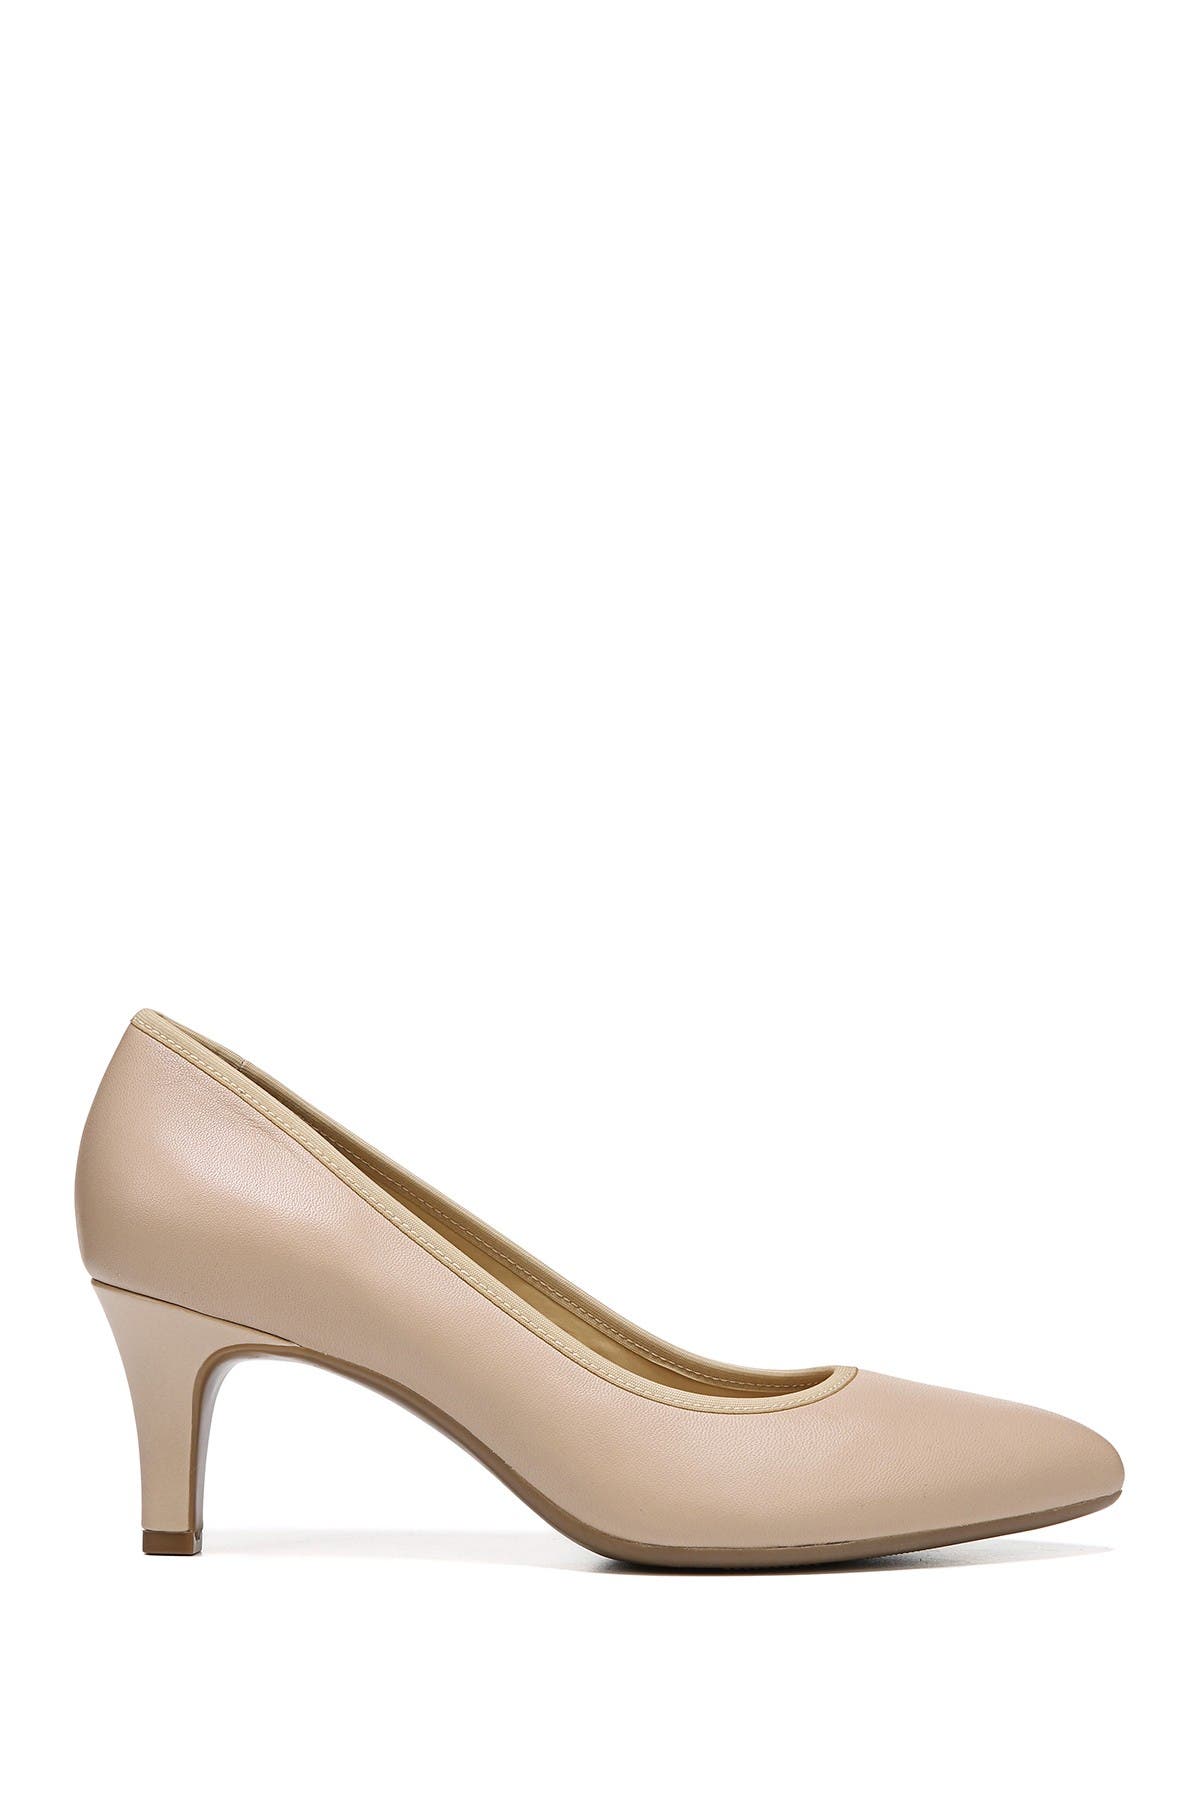 Naturalizer | Oden Leather Pump - Wide 